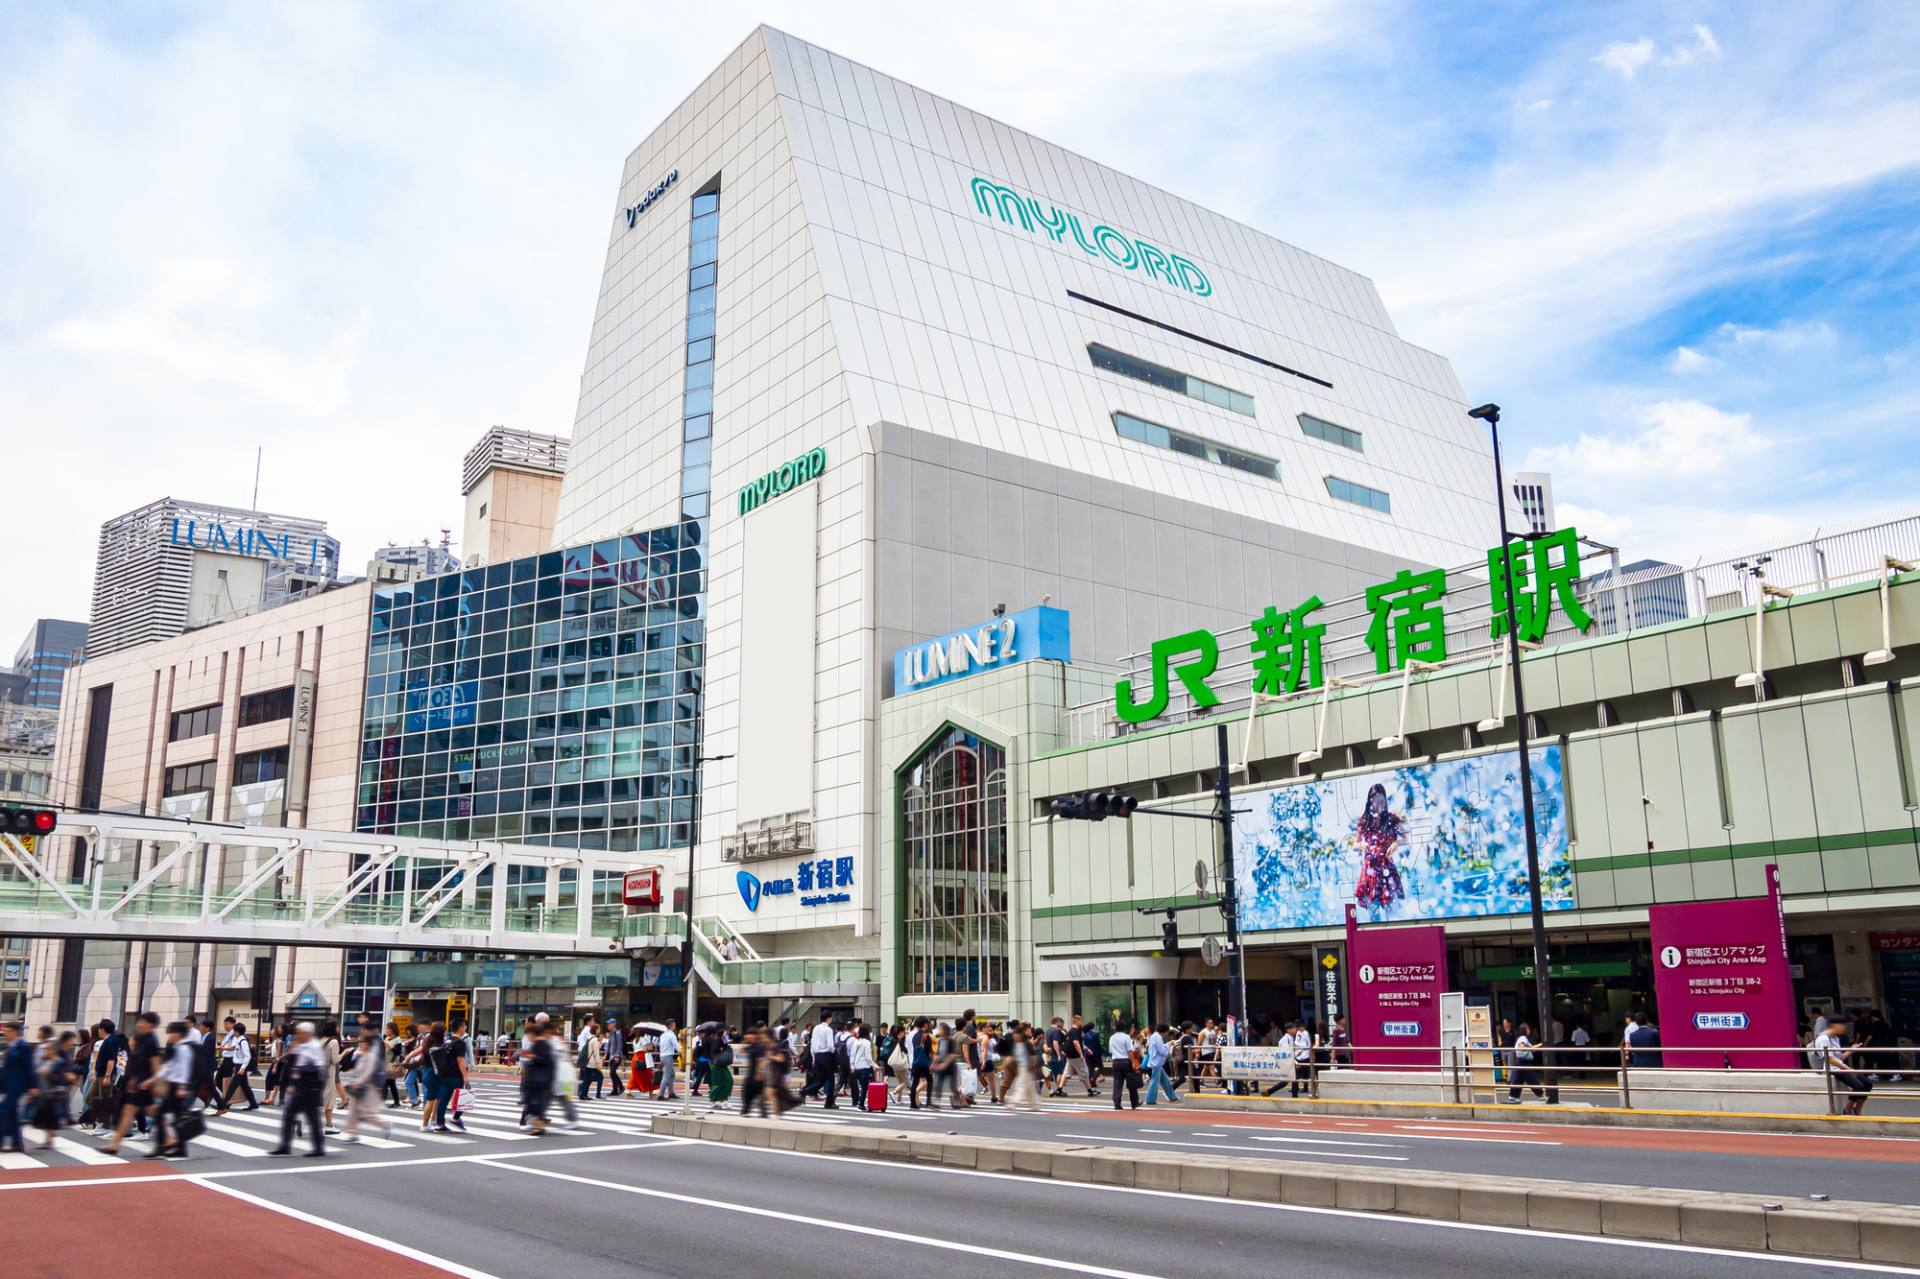 Shinjuku Mylord Where To Shop Access Hours Price Good Luck Trip